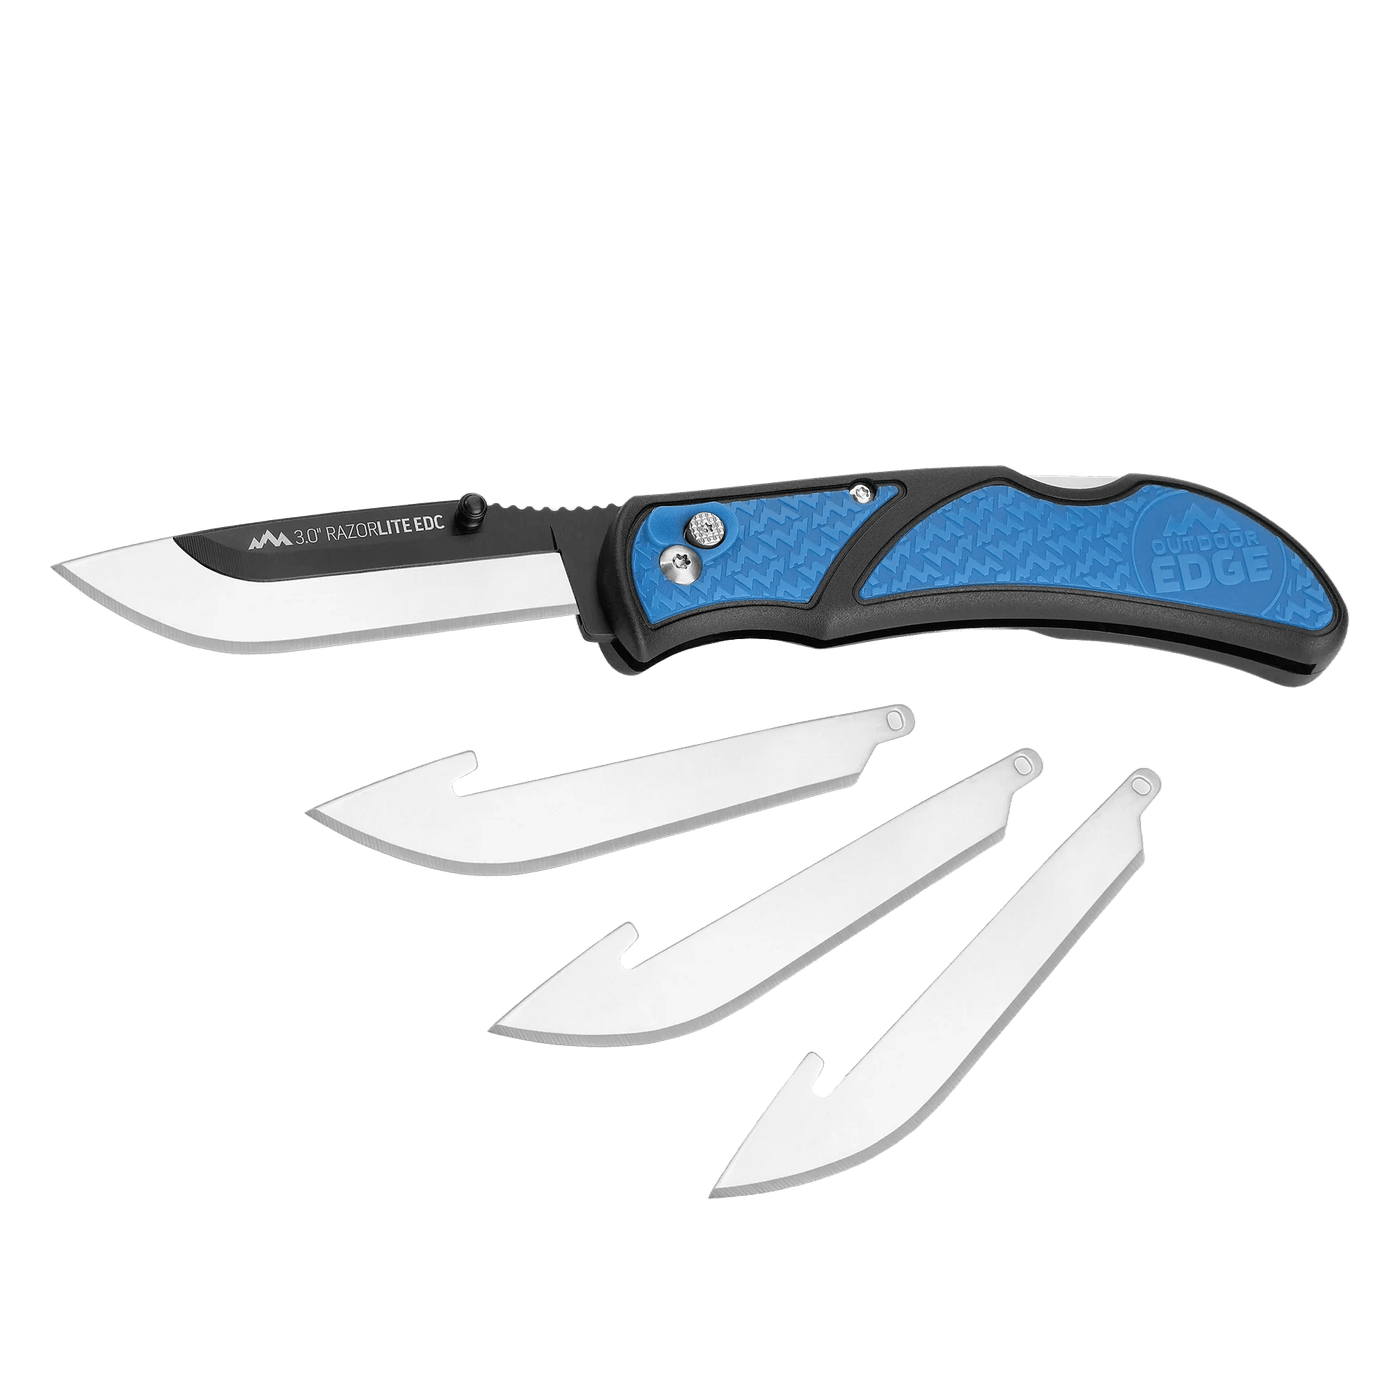 Outdoor Edge - 3.0" RazorEDC Lite Replaceable Blade Carry Knife Tools Outdoor Edge Blue 